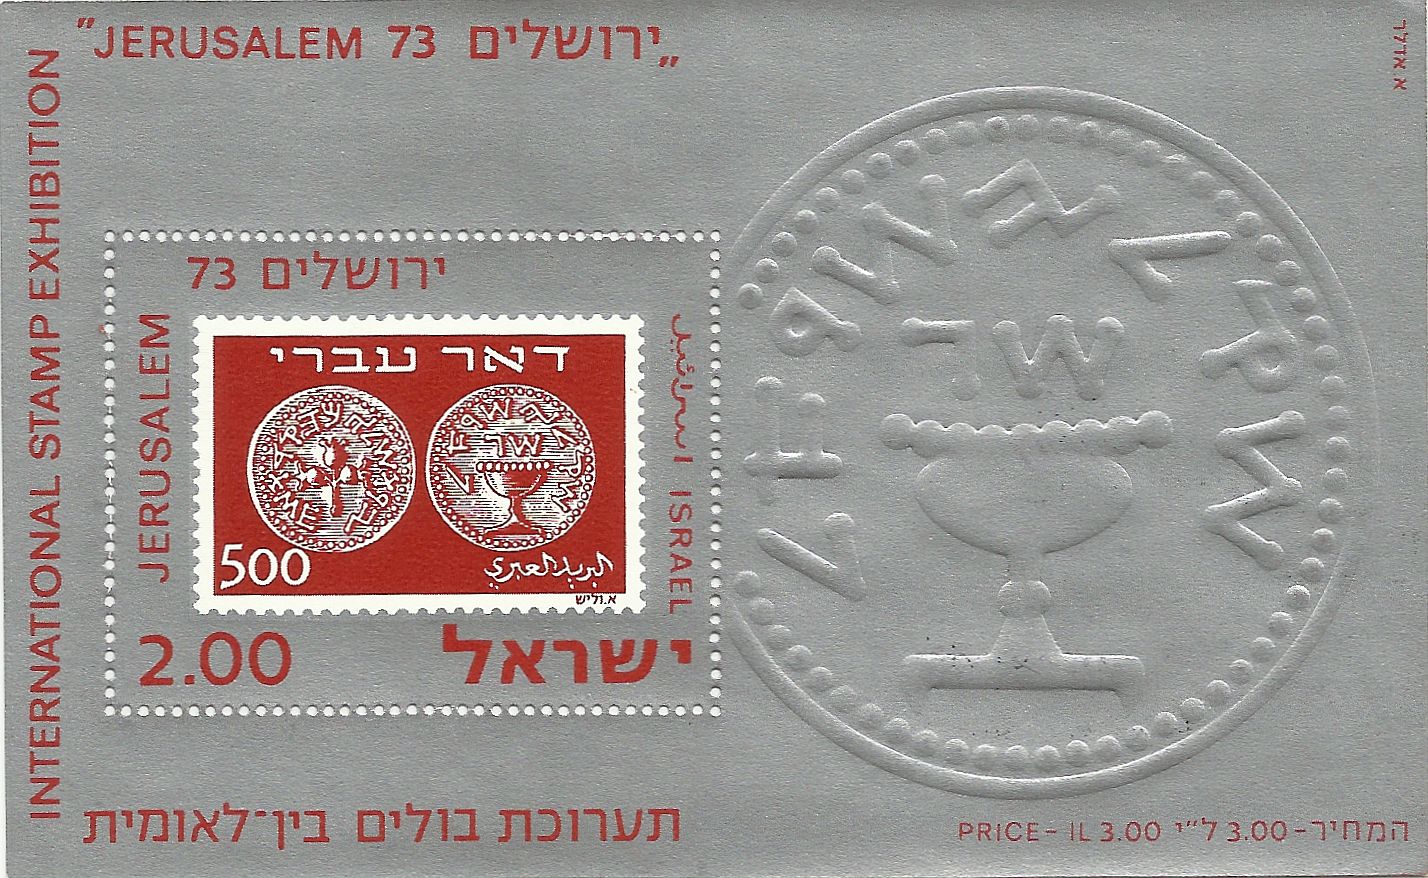 http://static.israelphilately.org.il/images/stamps/1242_L.jpg